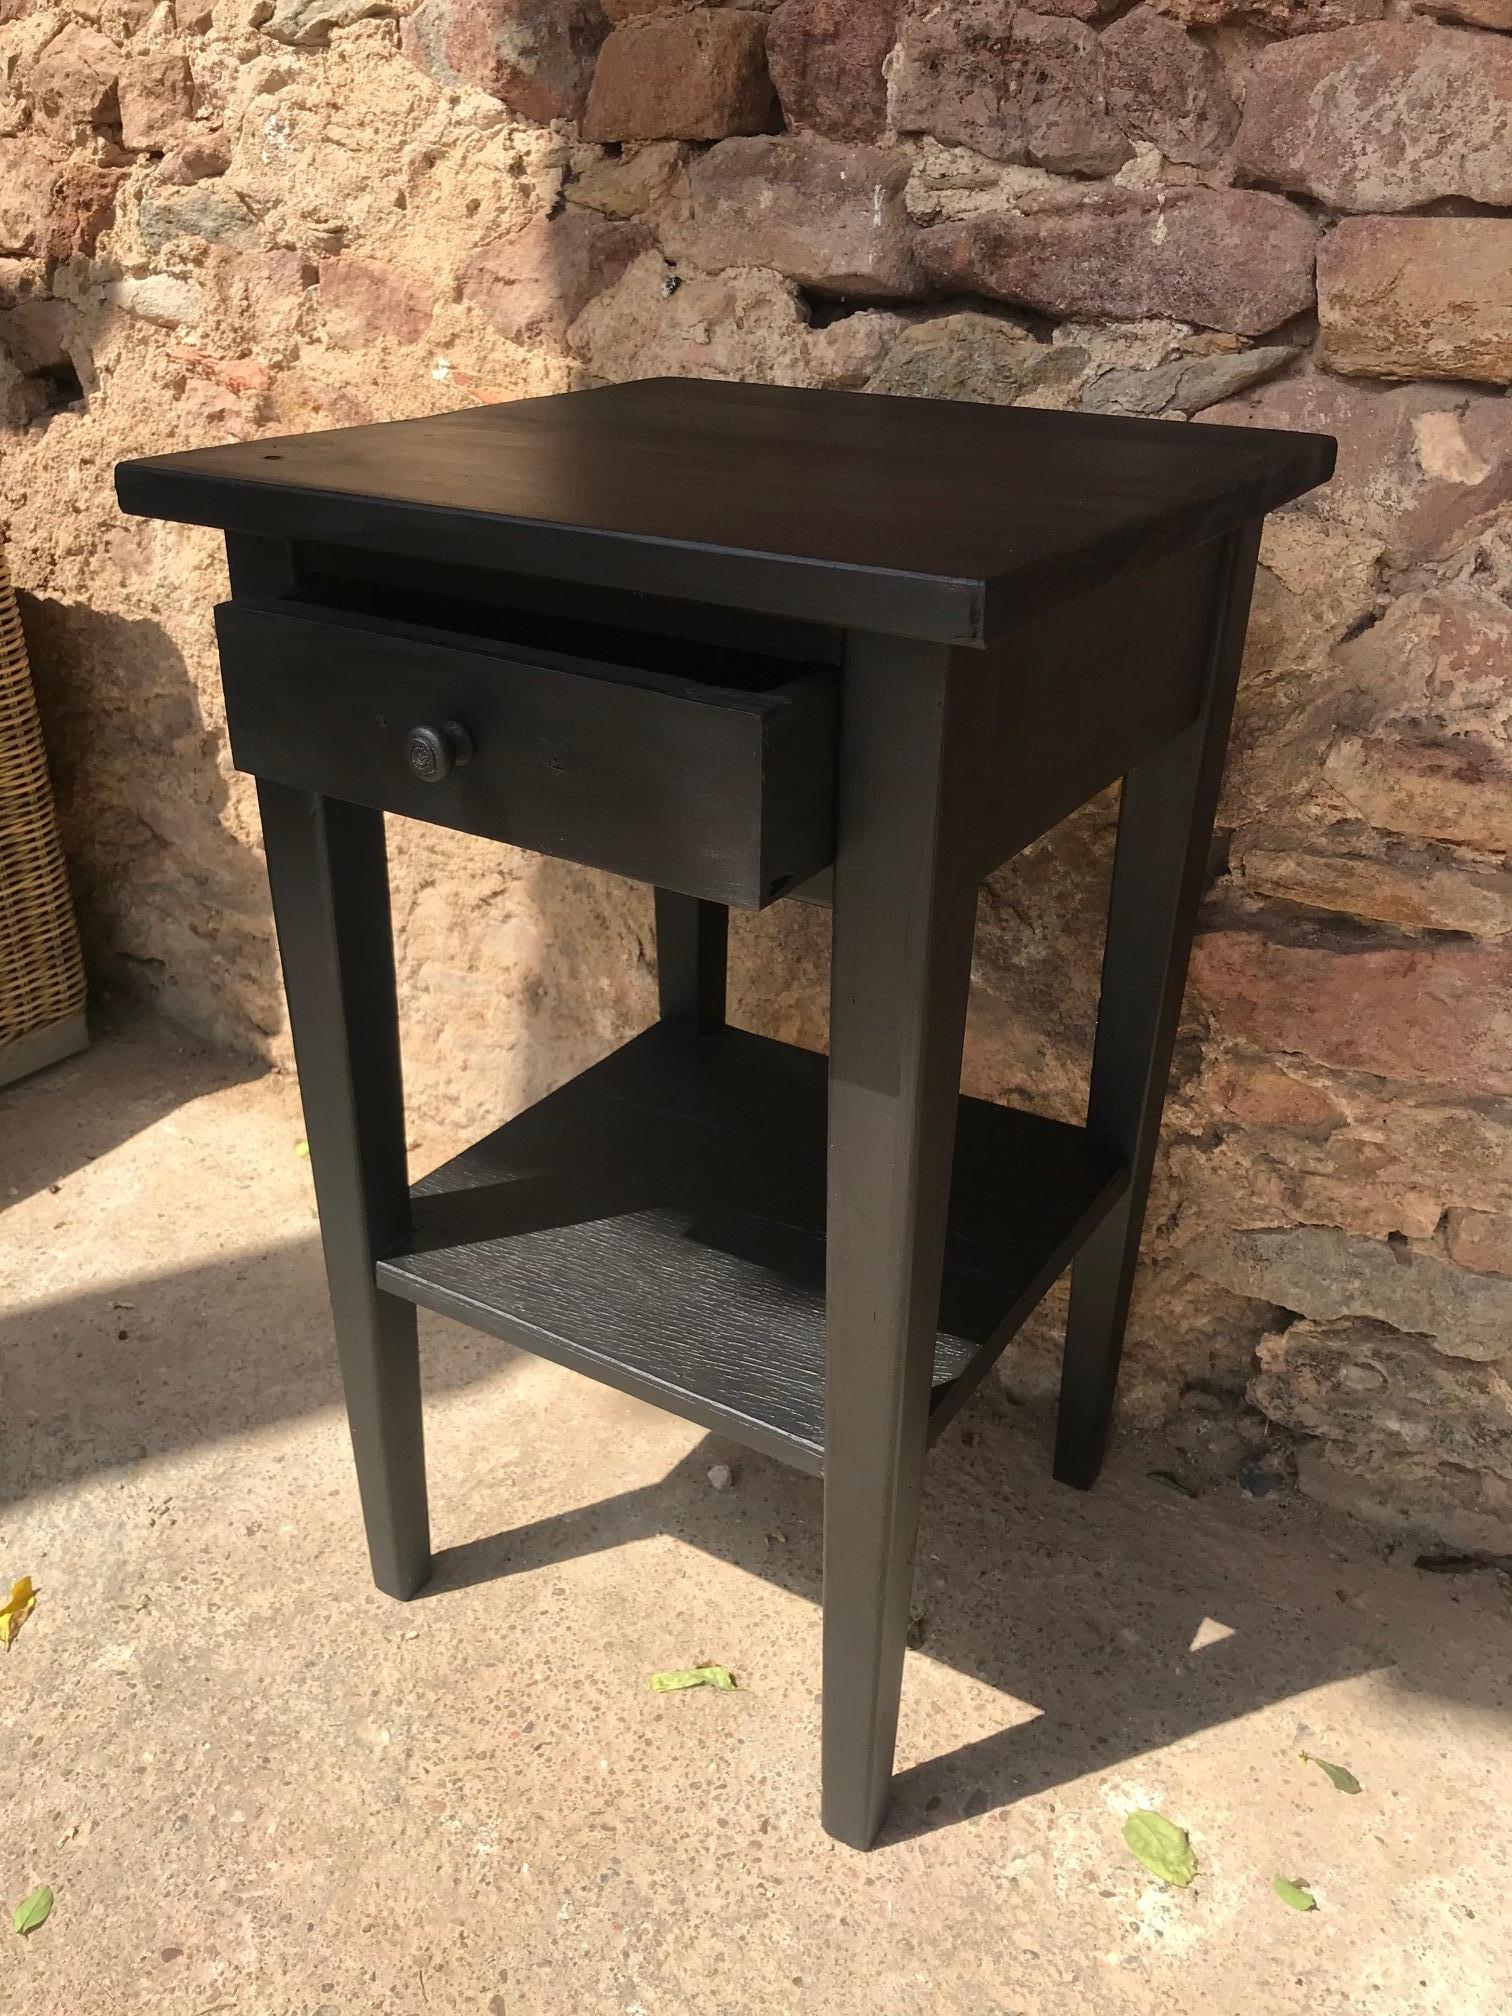 Very nice 20th century French black painted fir side table from the 1920s.
Can be used as a bedside.
One drawer. 
Good condition and quality.